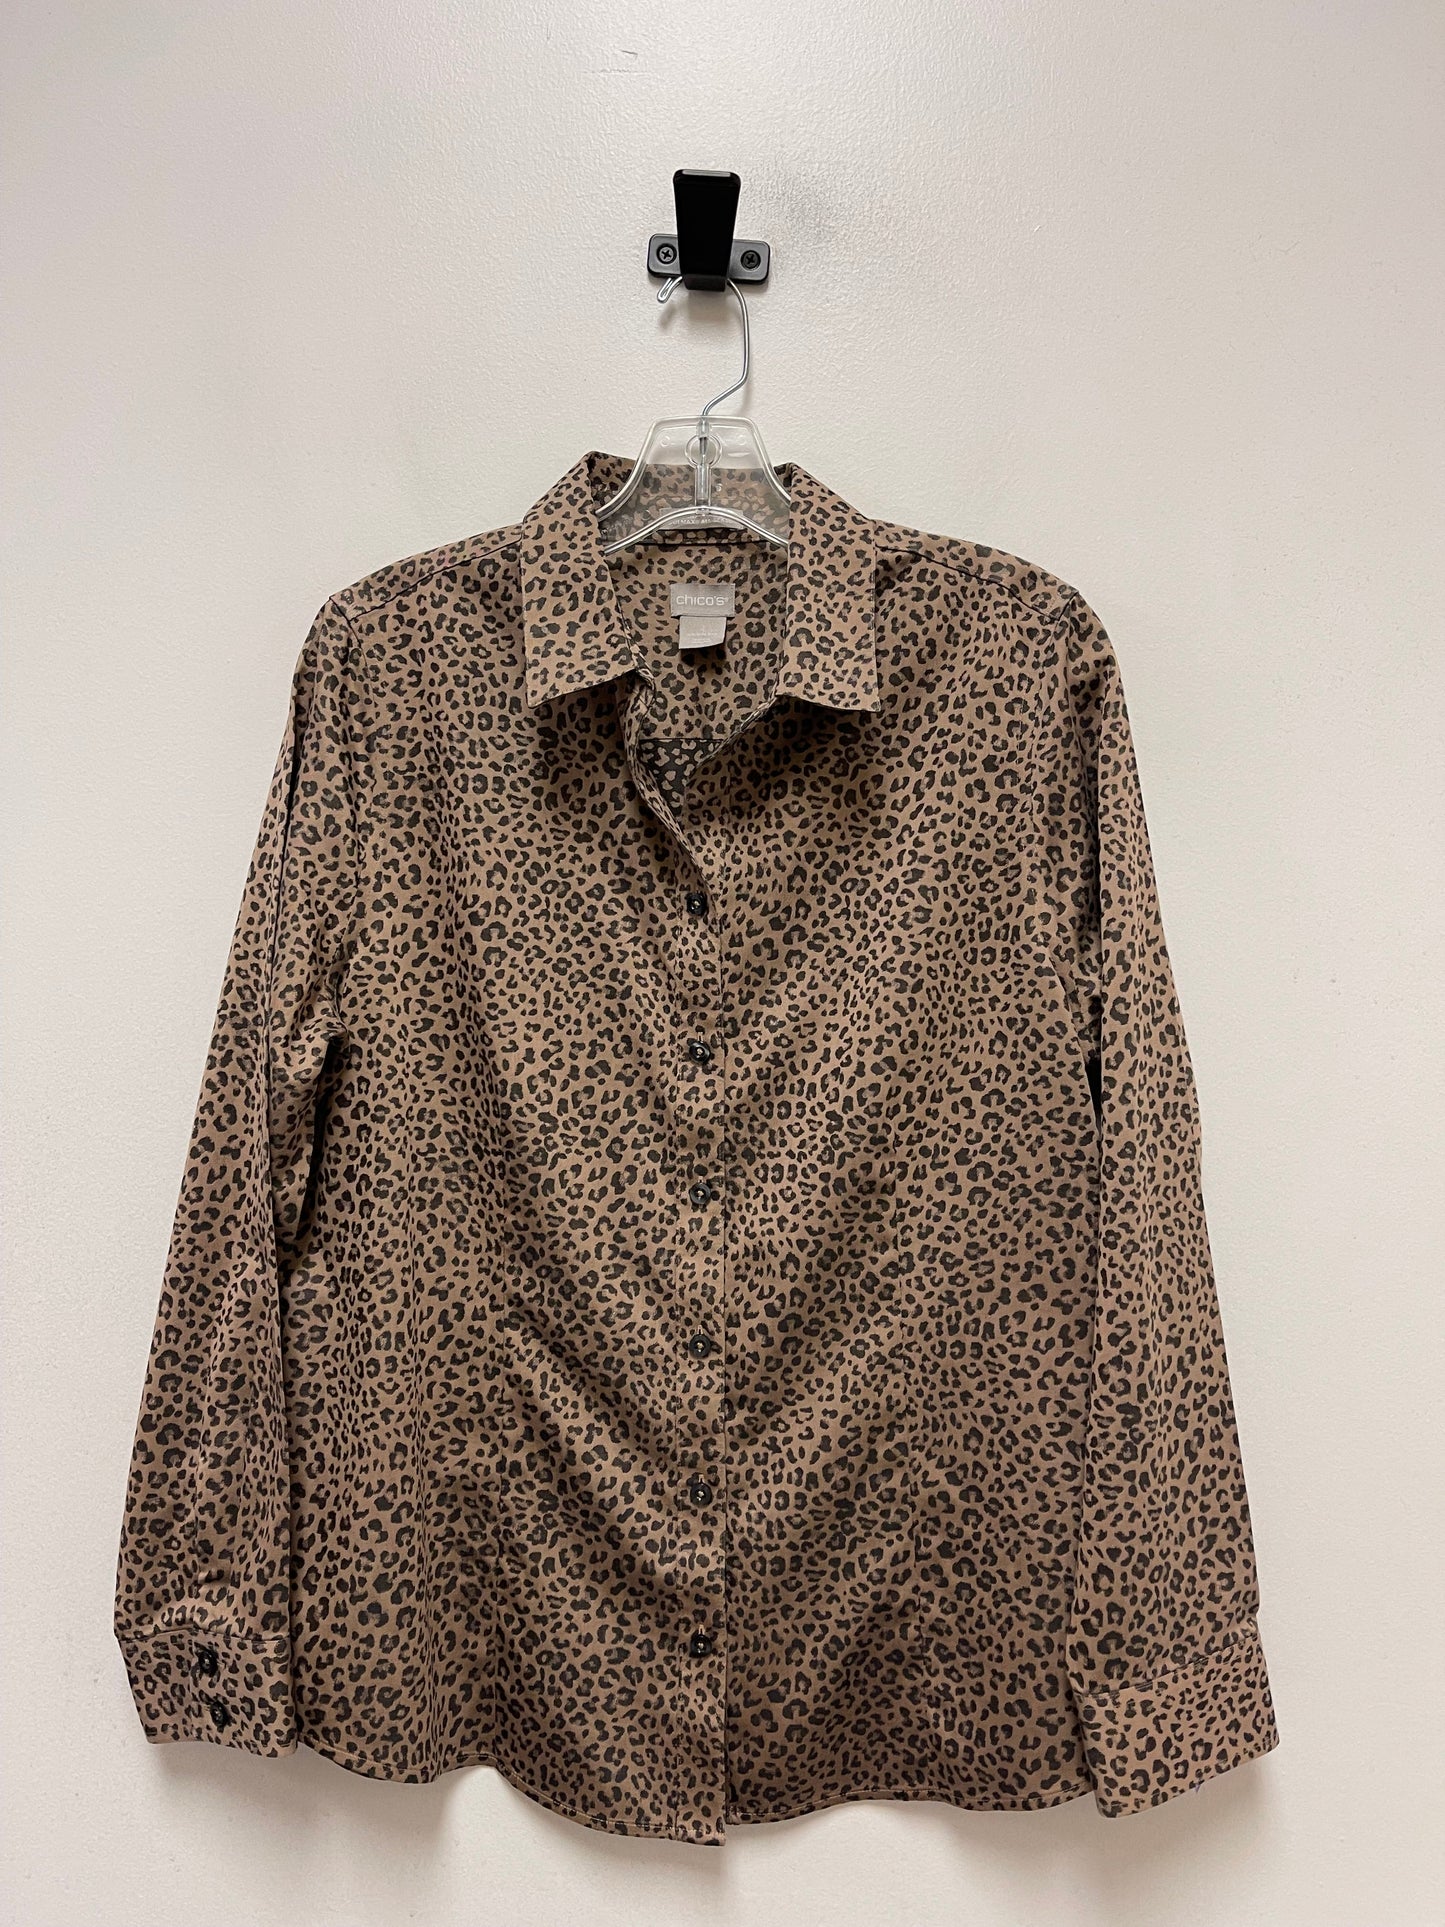 Brown Top Long Sleeve Chicos, Size M